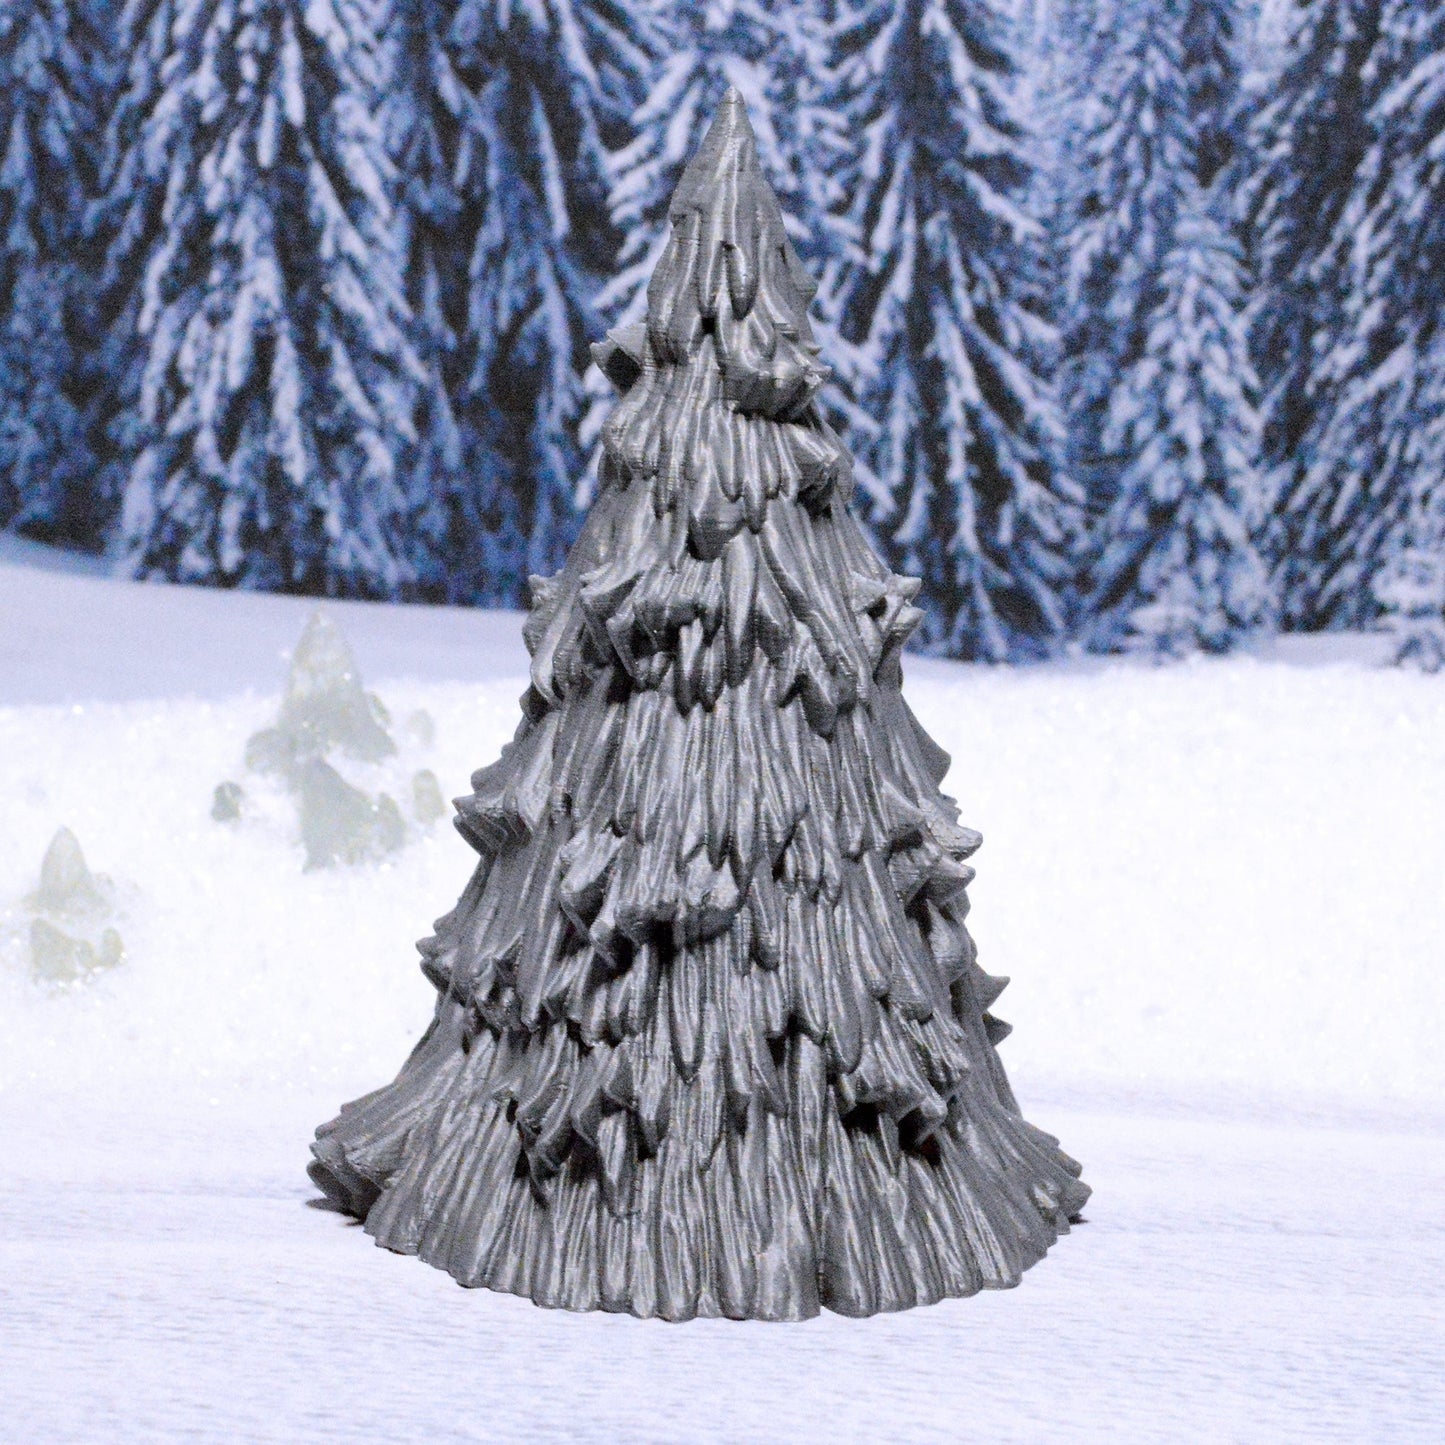 Miniature Shelter Pine Trees 15mm 28mm 32mm for D&D Icewind Dale Terrain, DnD Pathfinder Wargame Frozen Forest